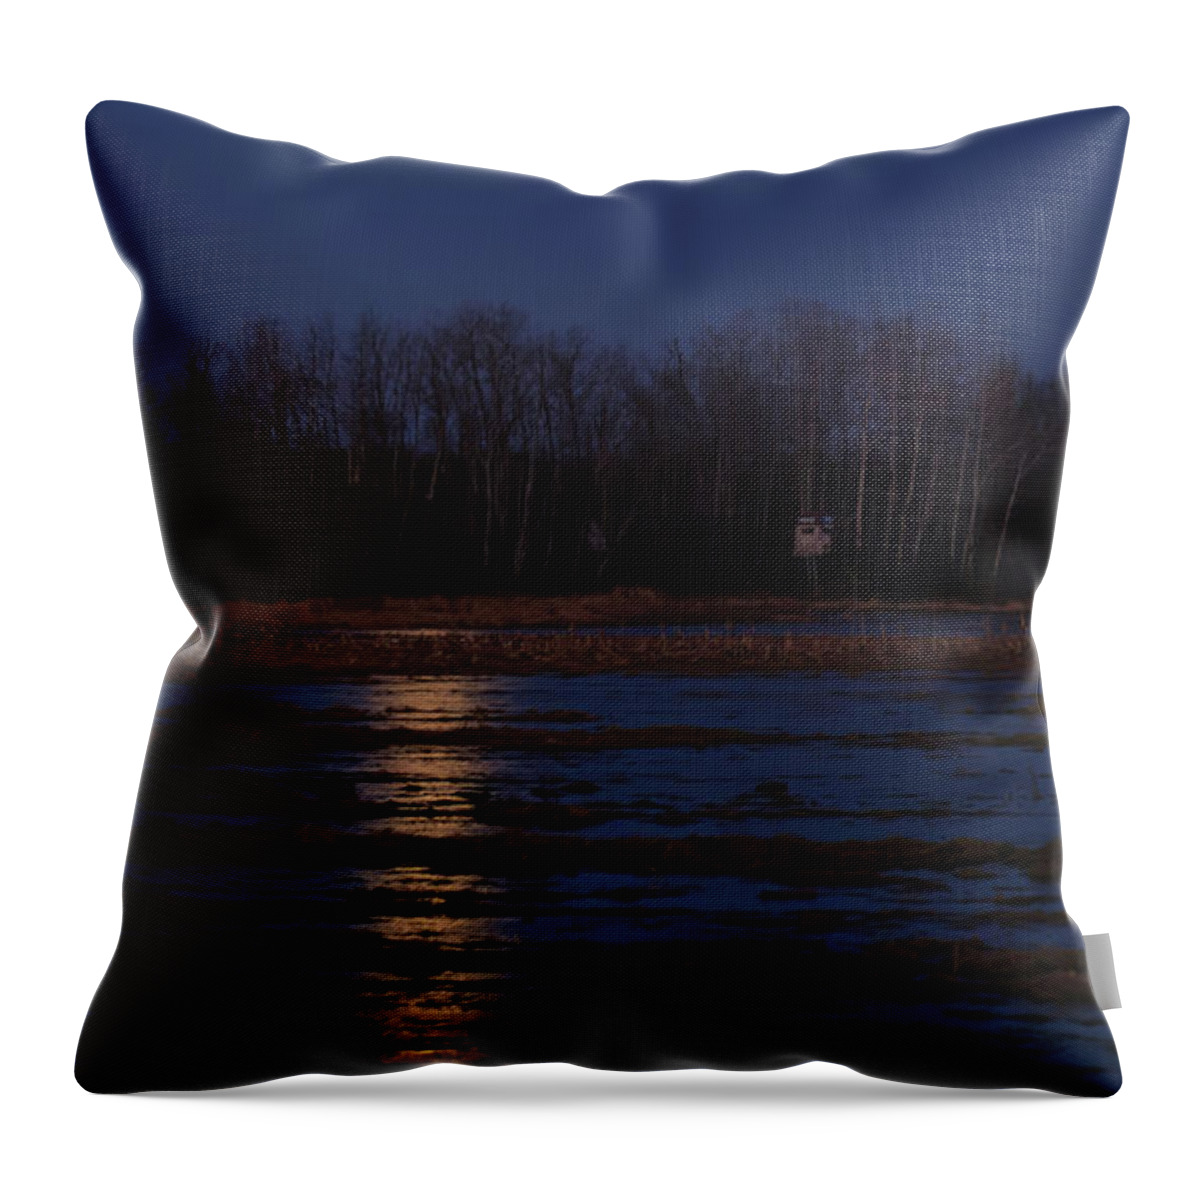 Moon Reflections Throw Pillow featuring the photograph Moon Reflections by Brook Burling